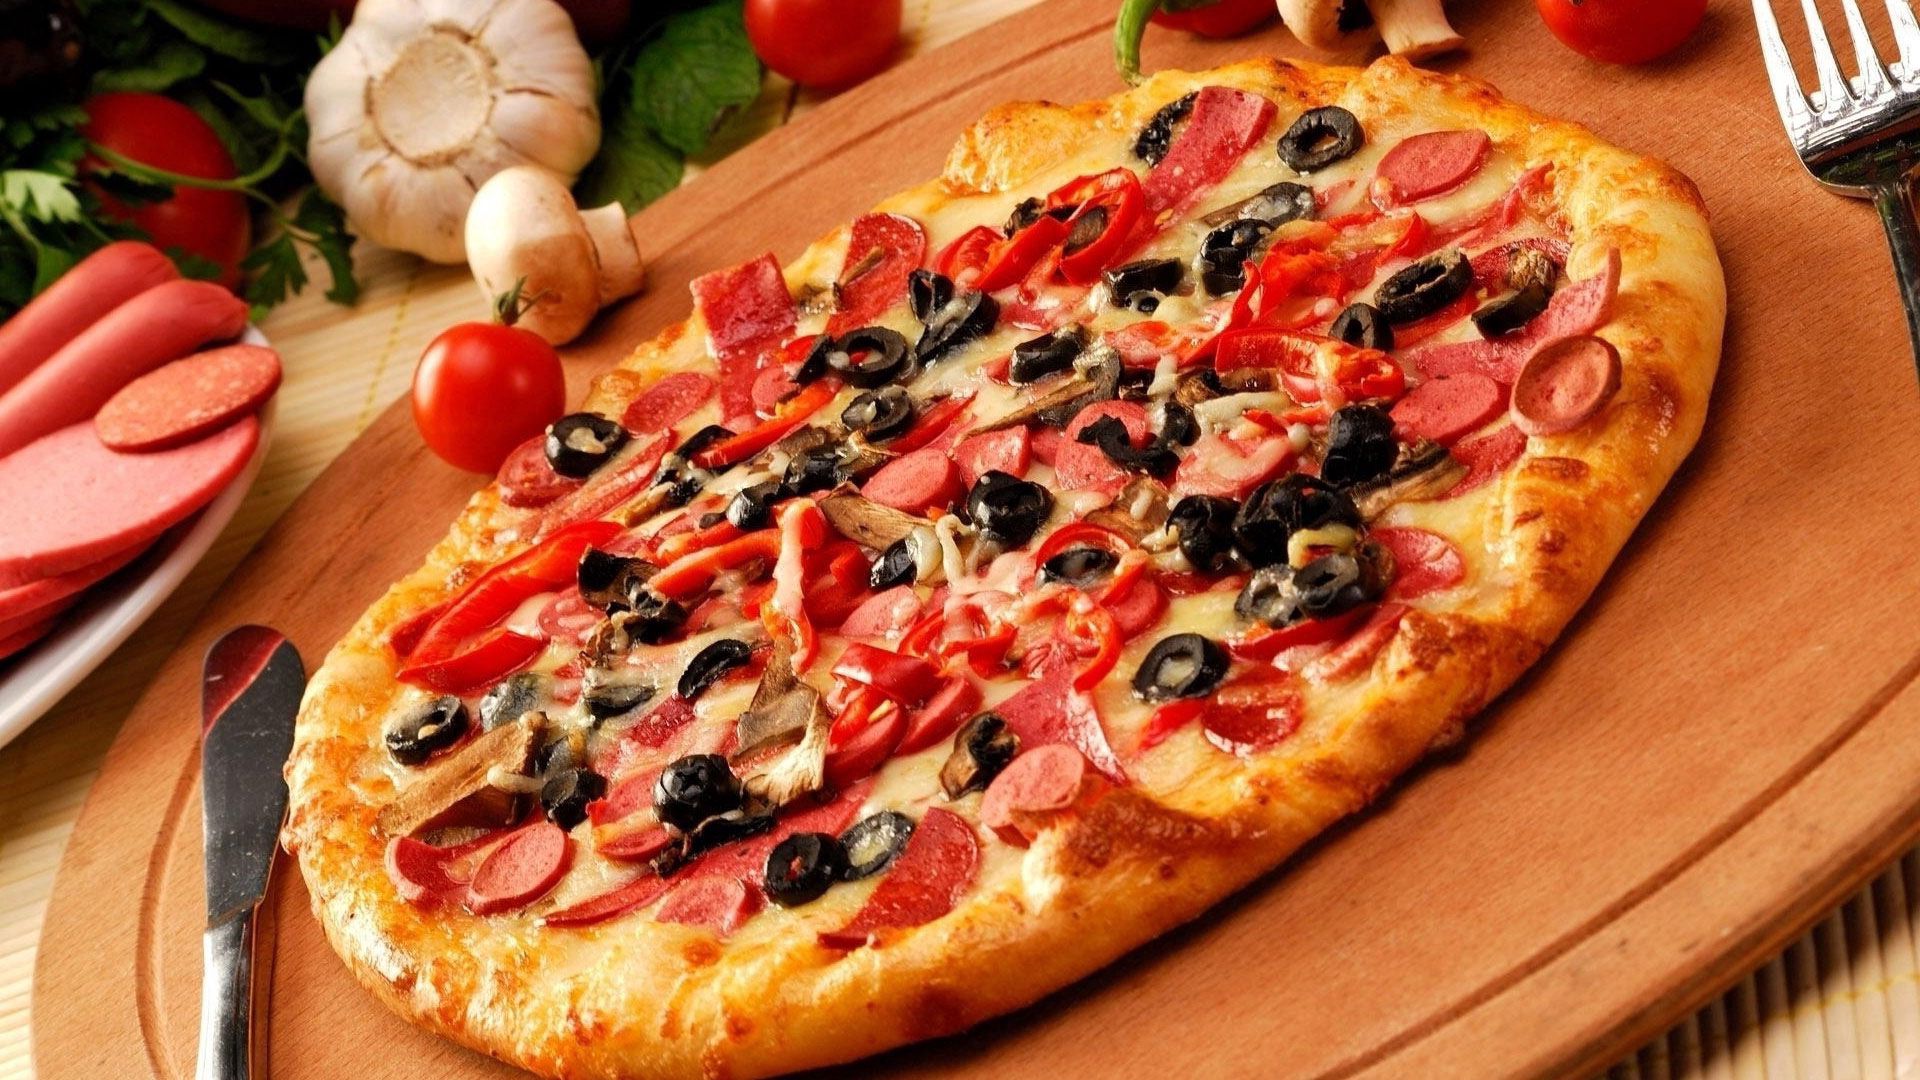 pizza, bakery products, food, baking, fork, knife QHD